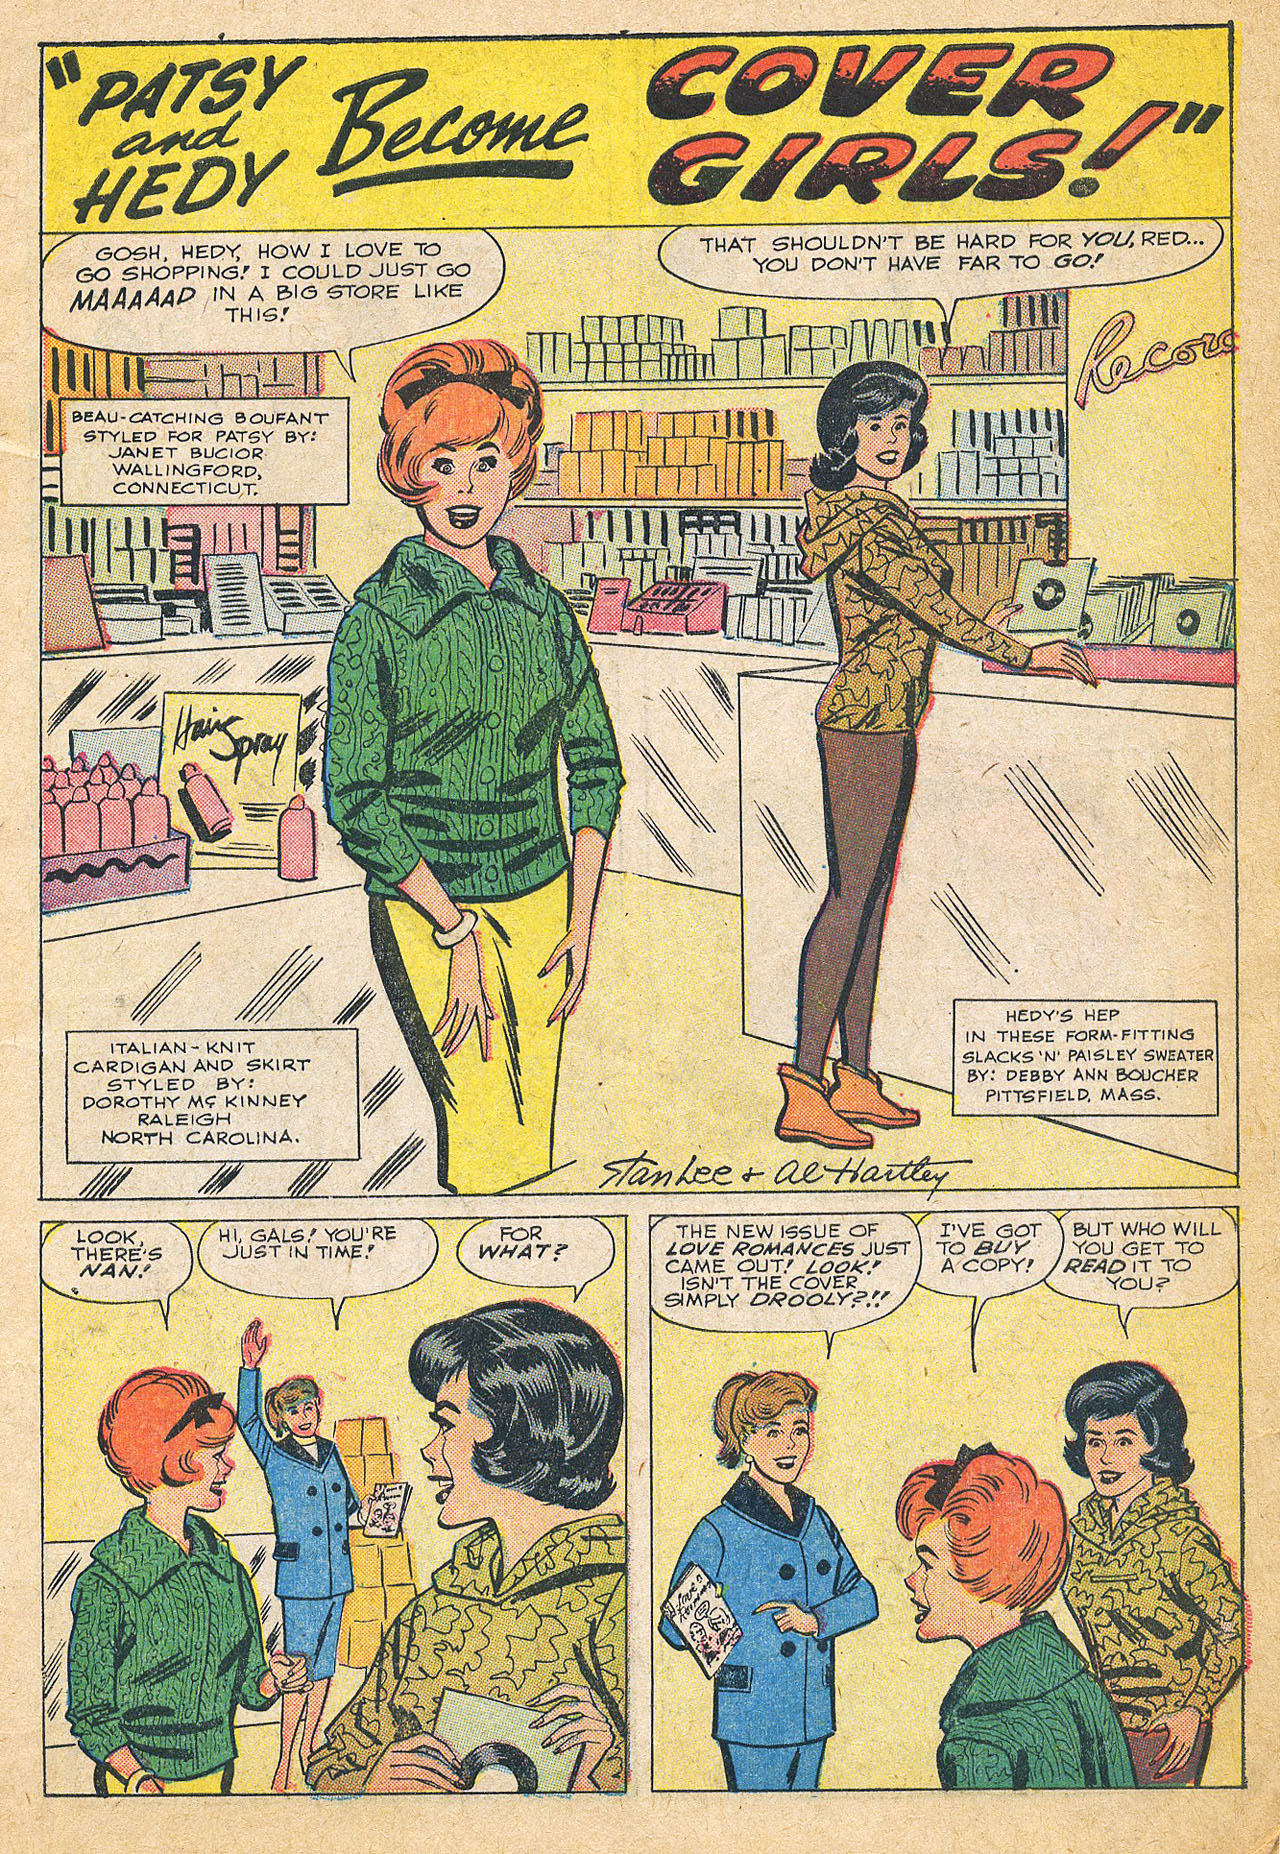 Read online Patsy and Hedy comic -  Issue #88 - 3